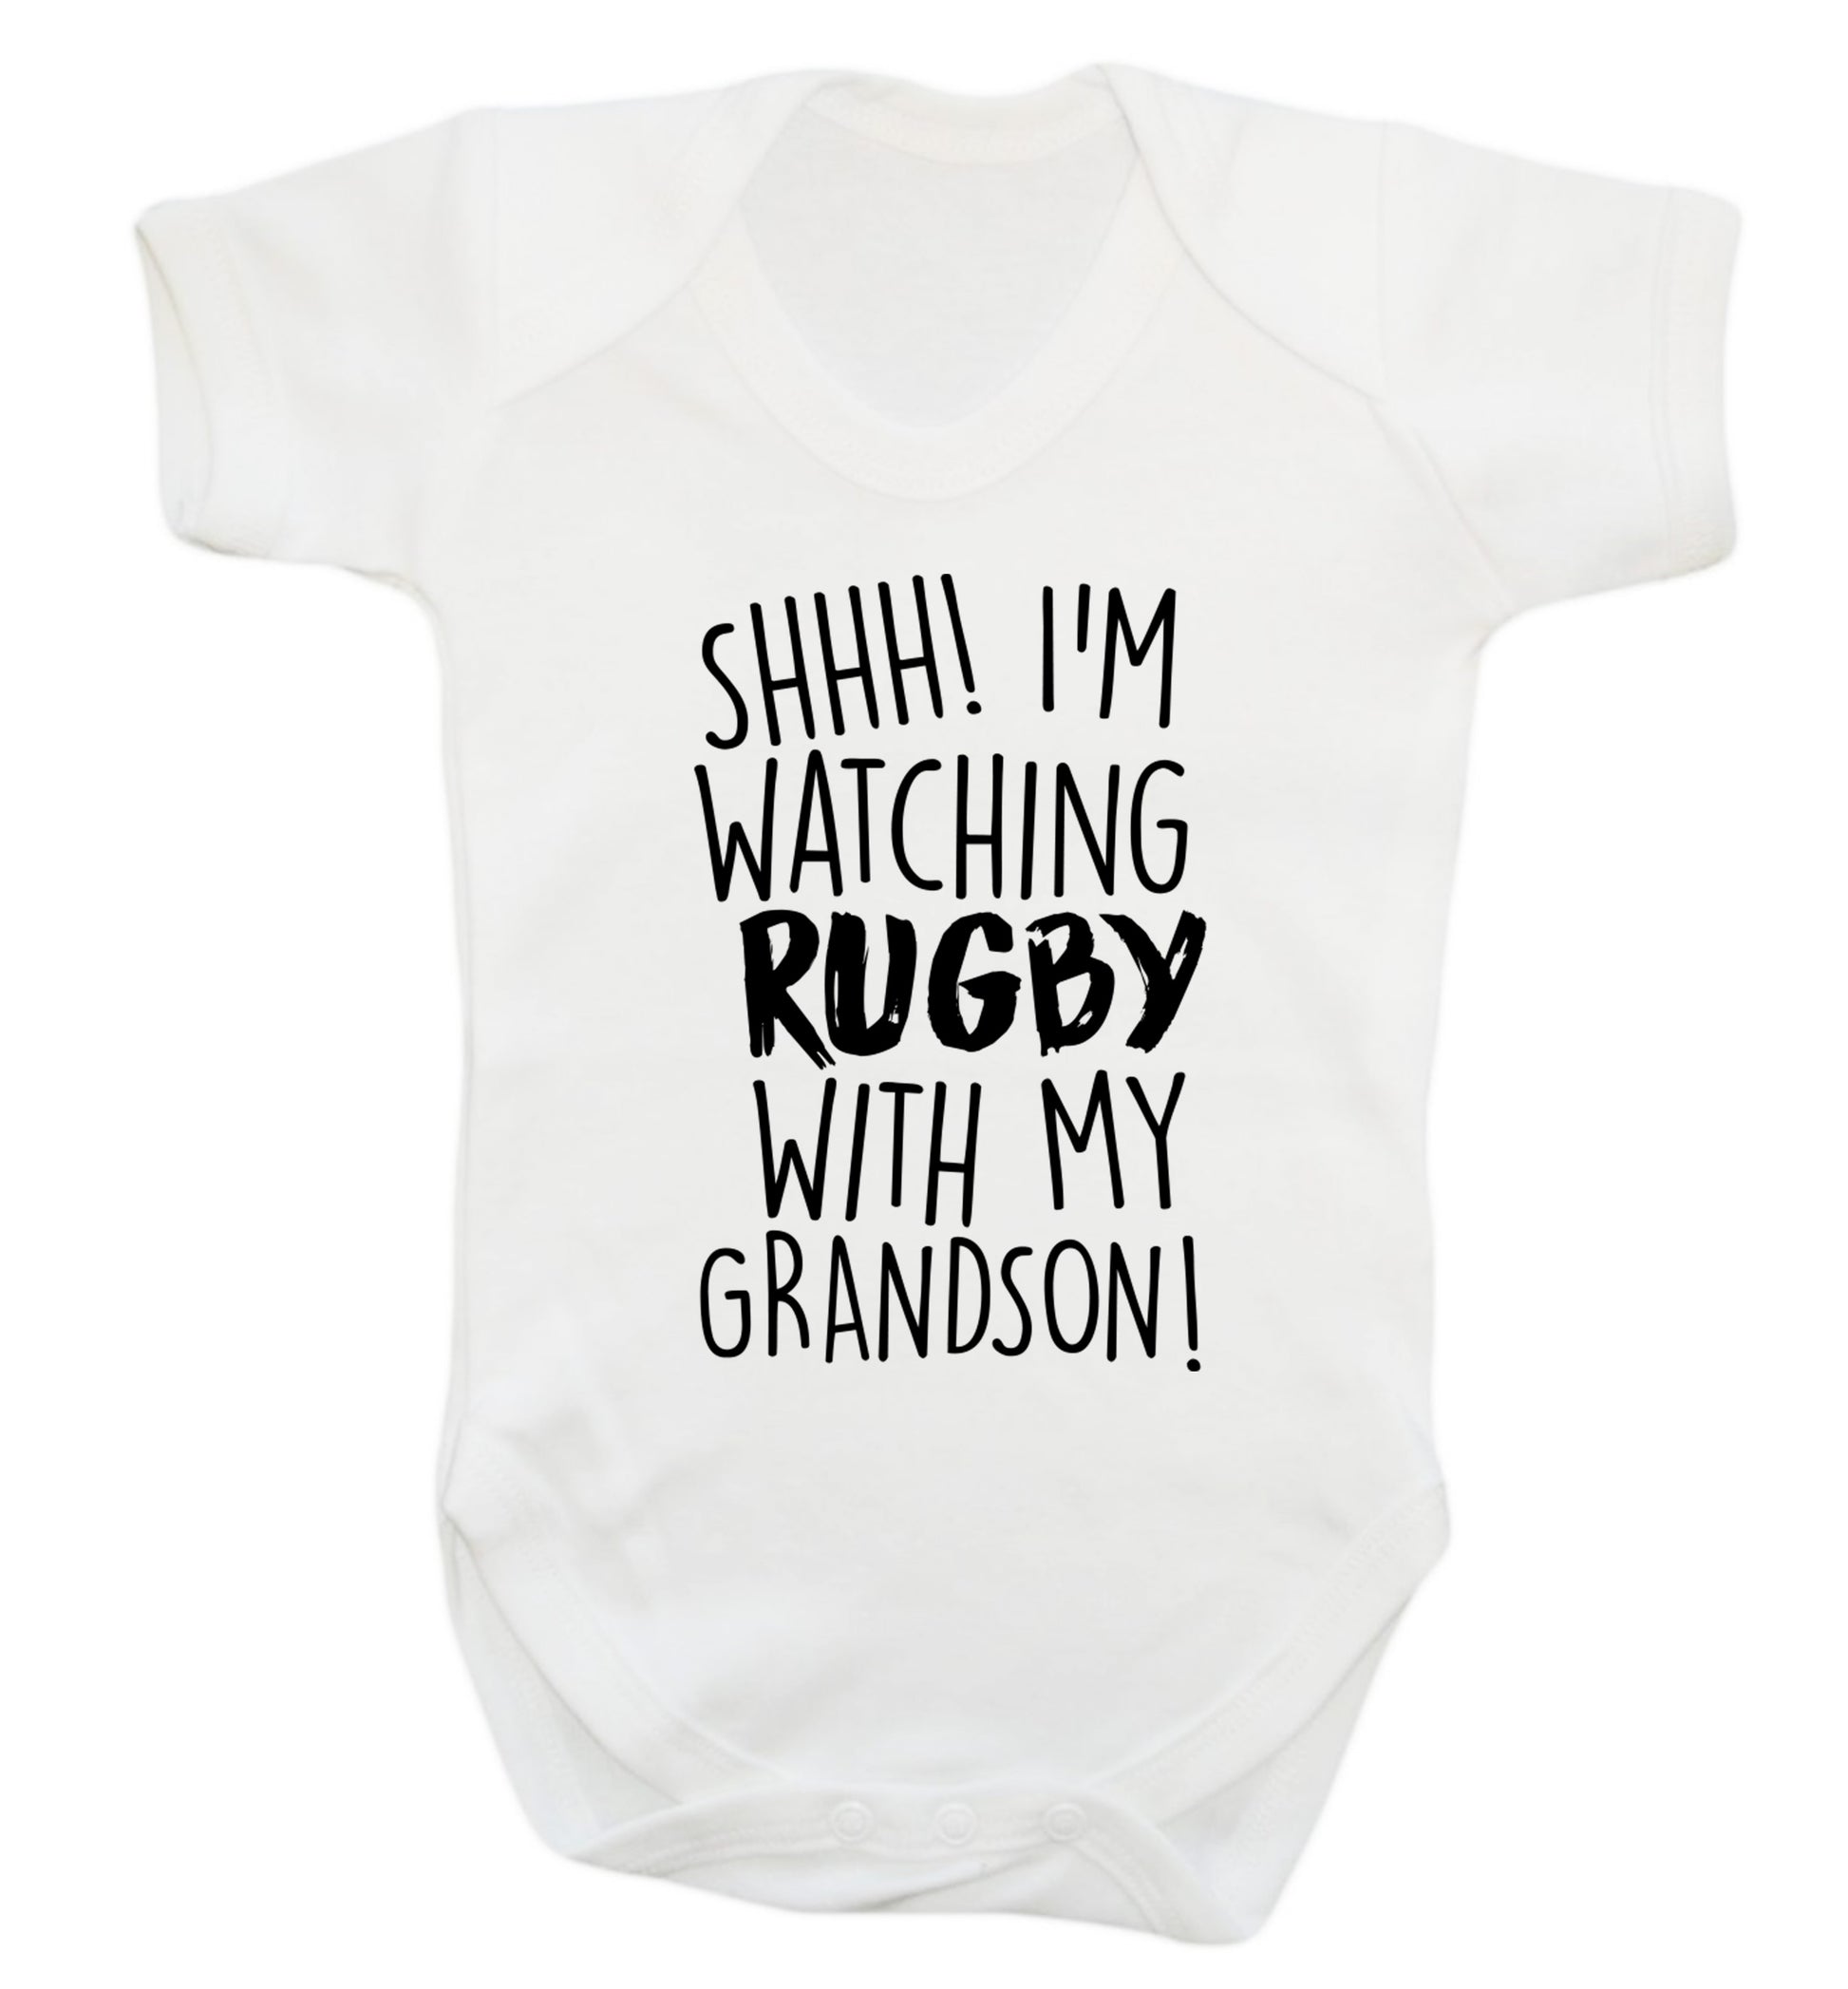 Shh I'm watching rugby with my grandson Baby Vest white 18-24 months